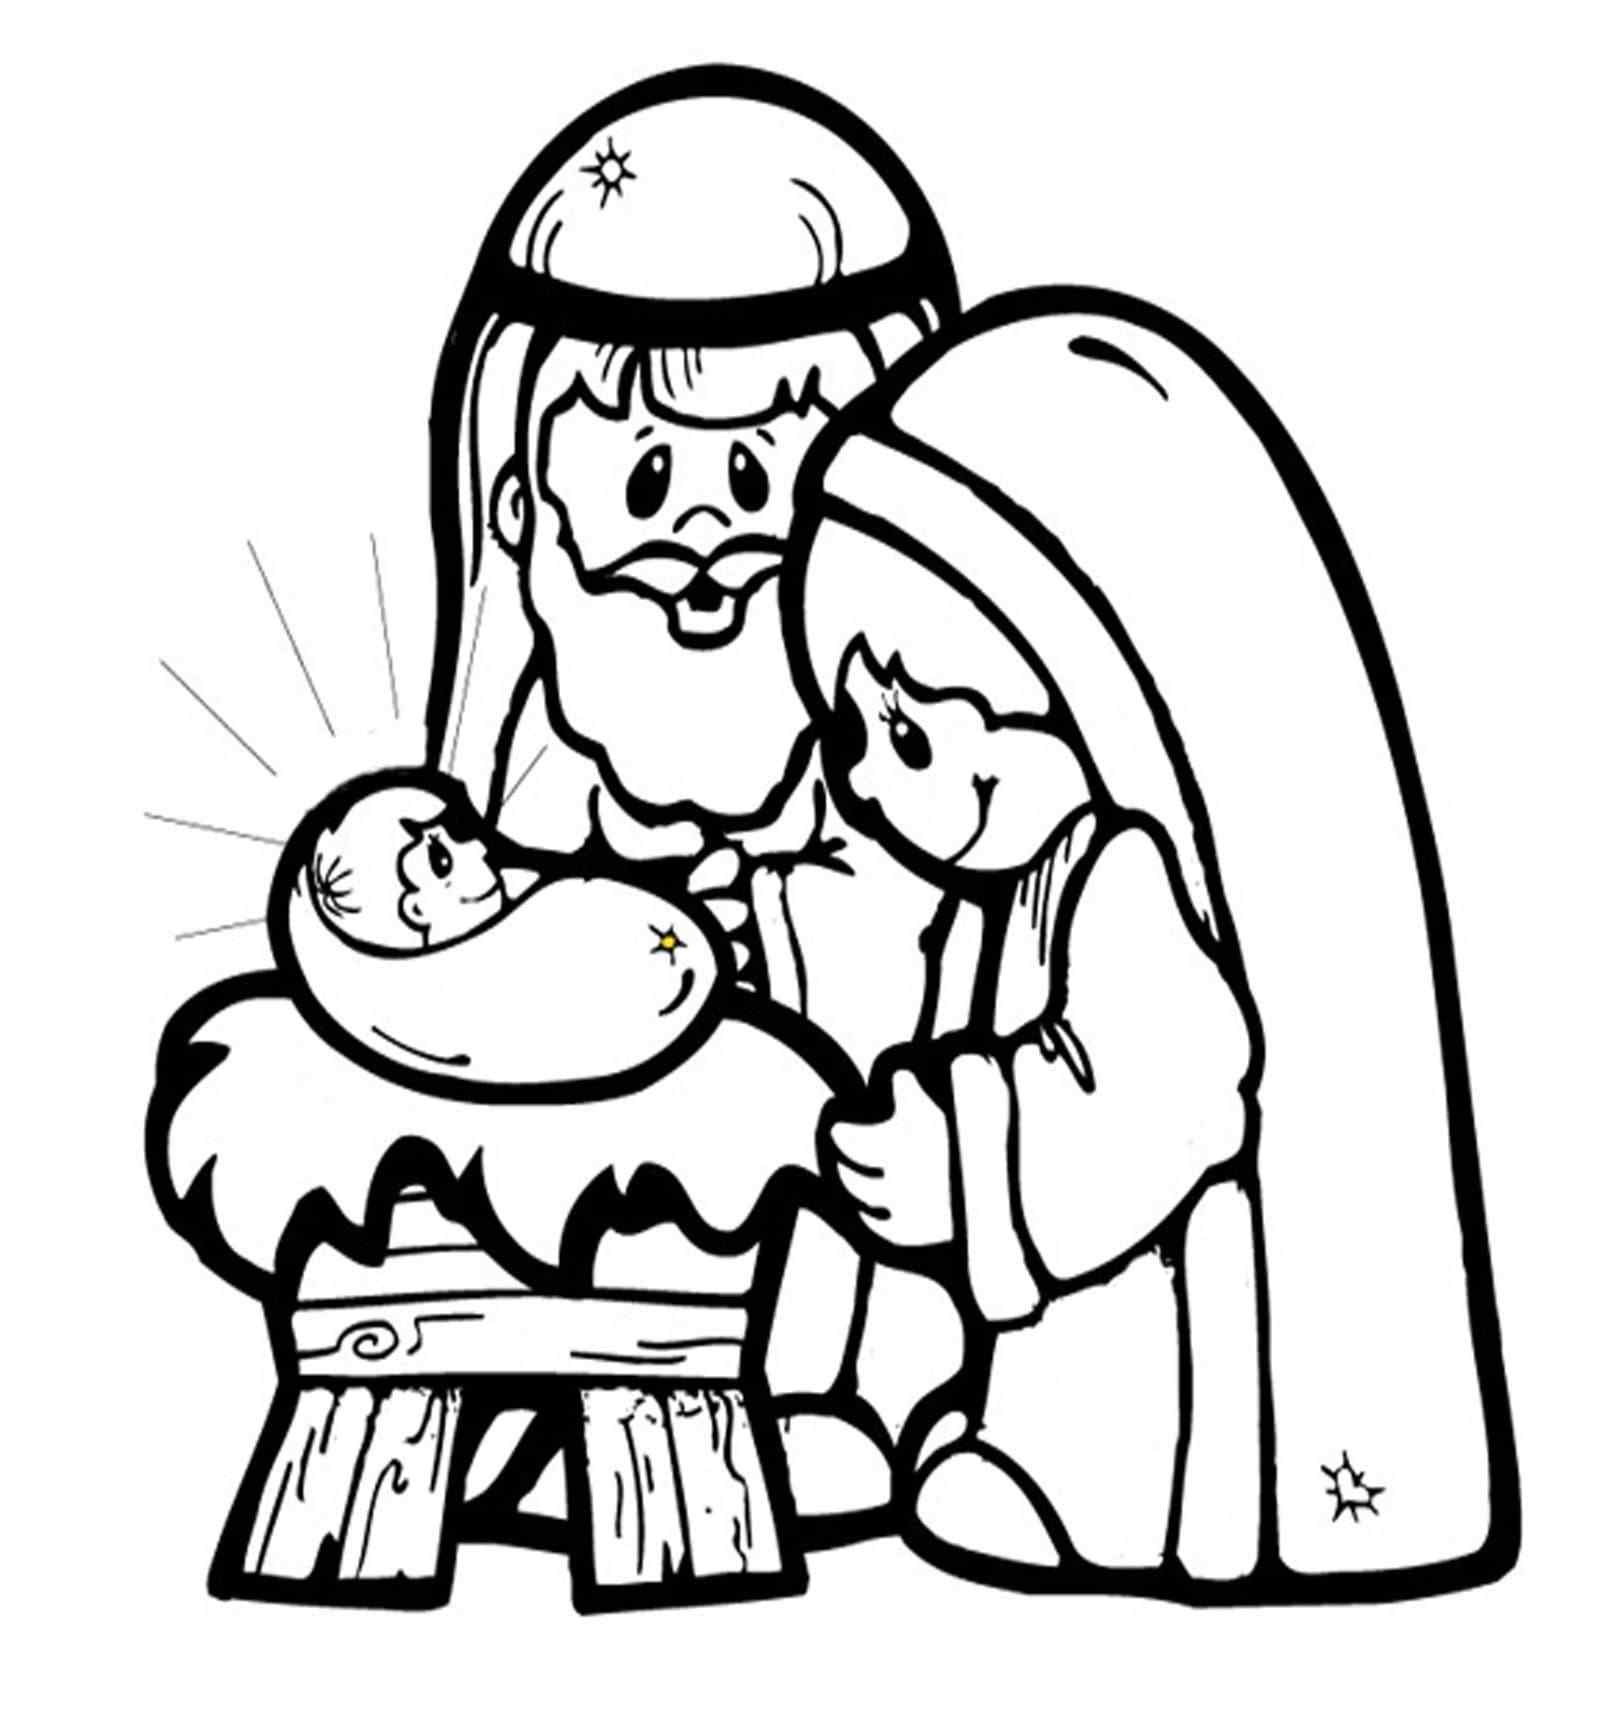 The Son Of God Became Human Coloring Pages - Coloring Cool